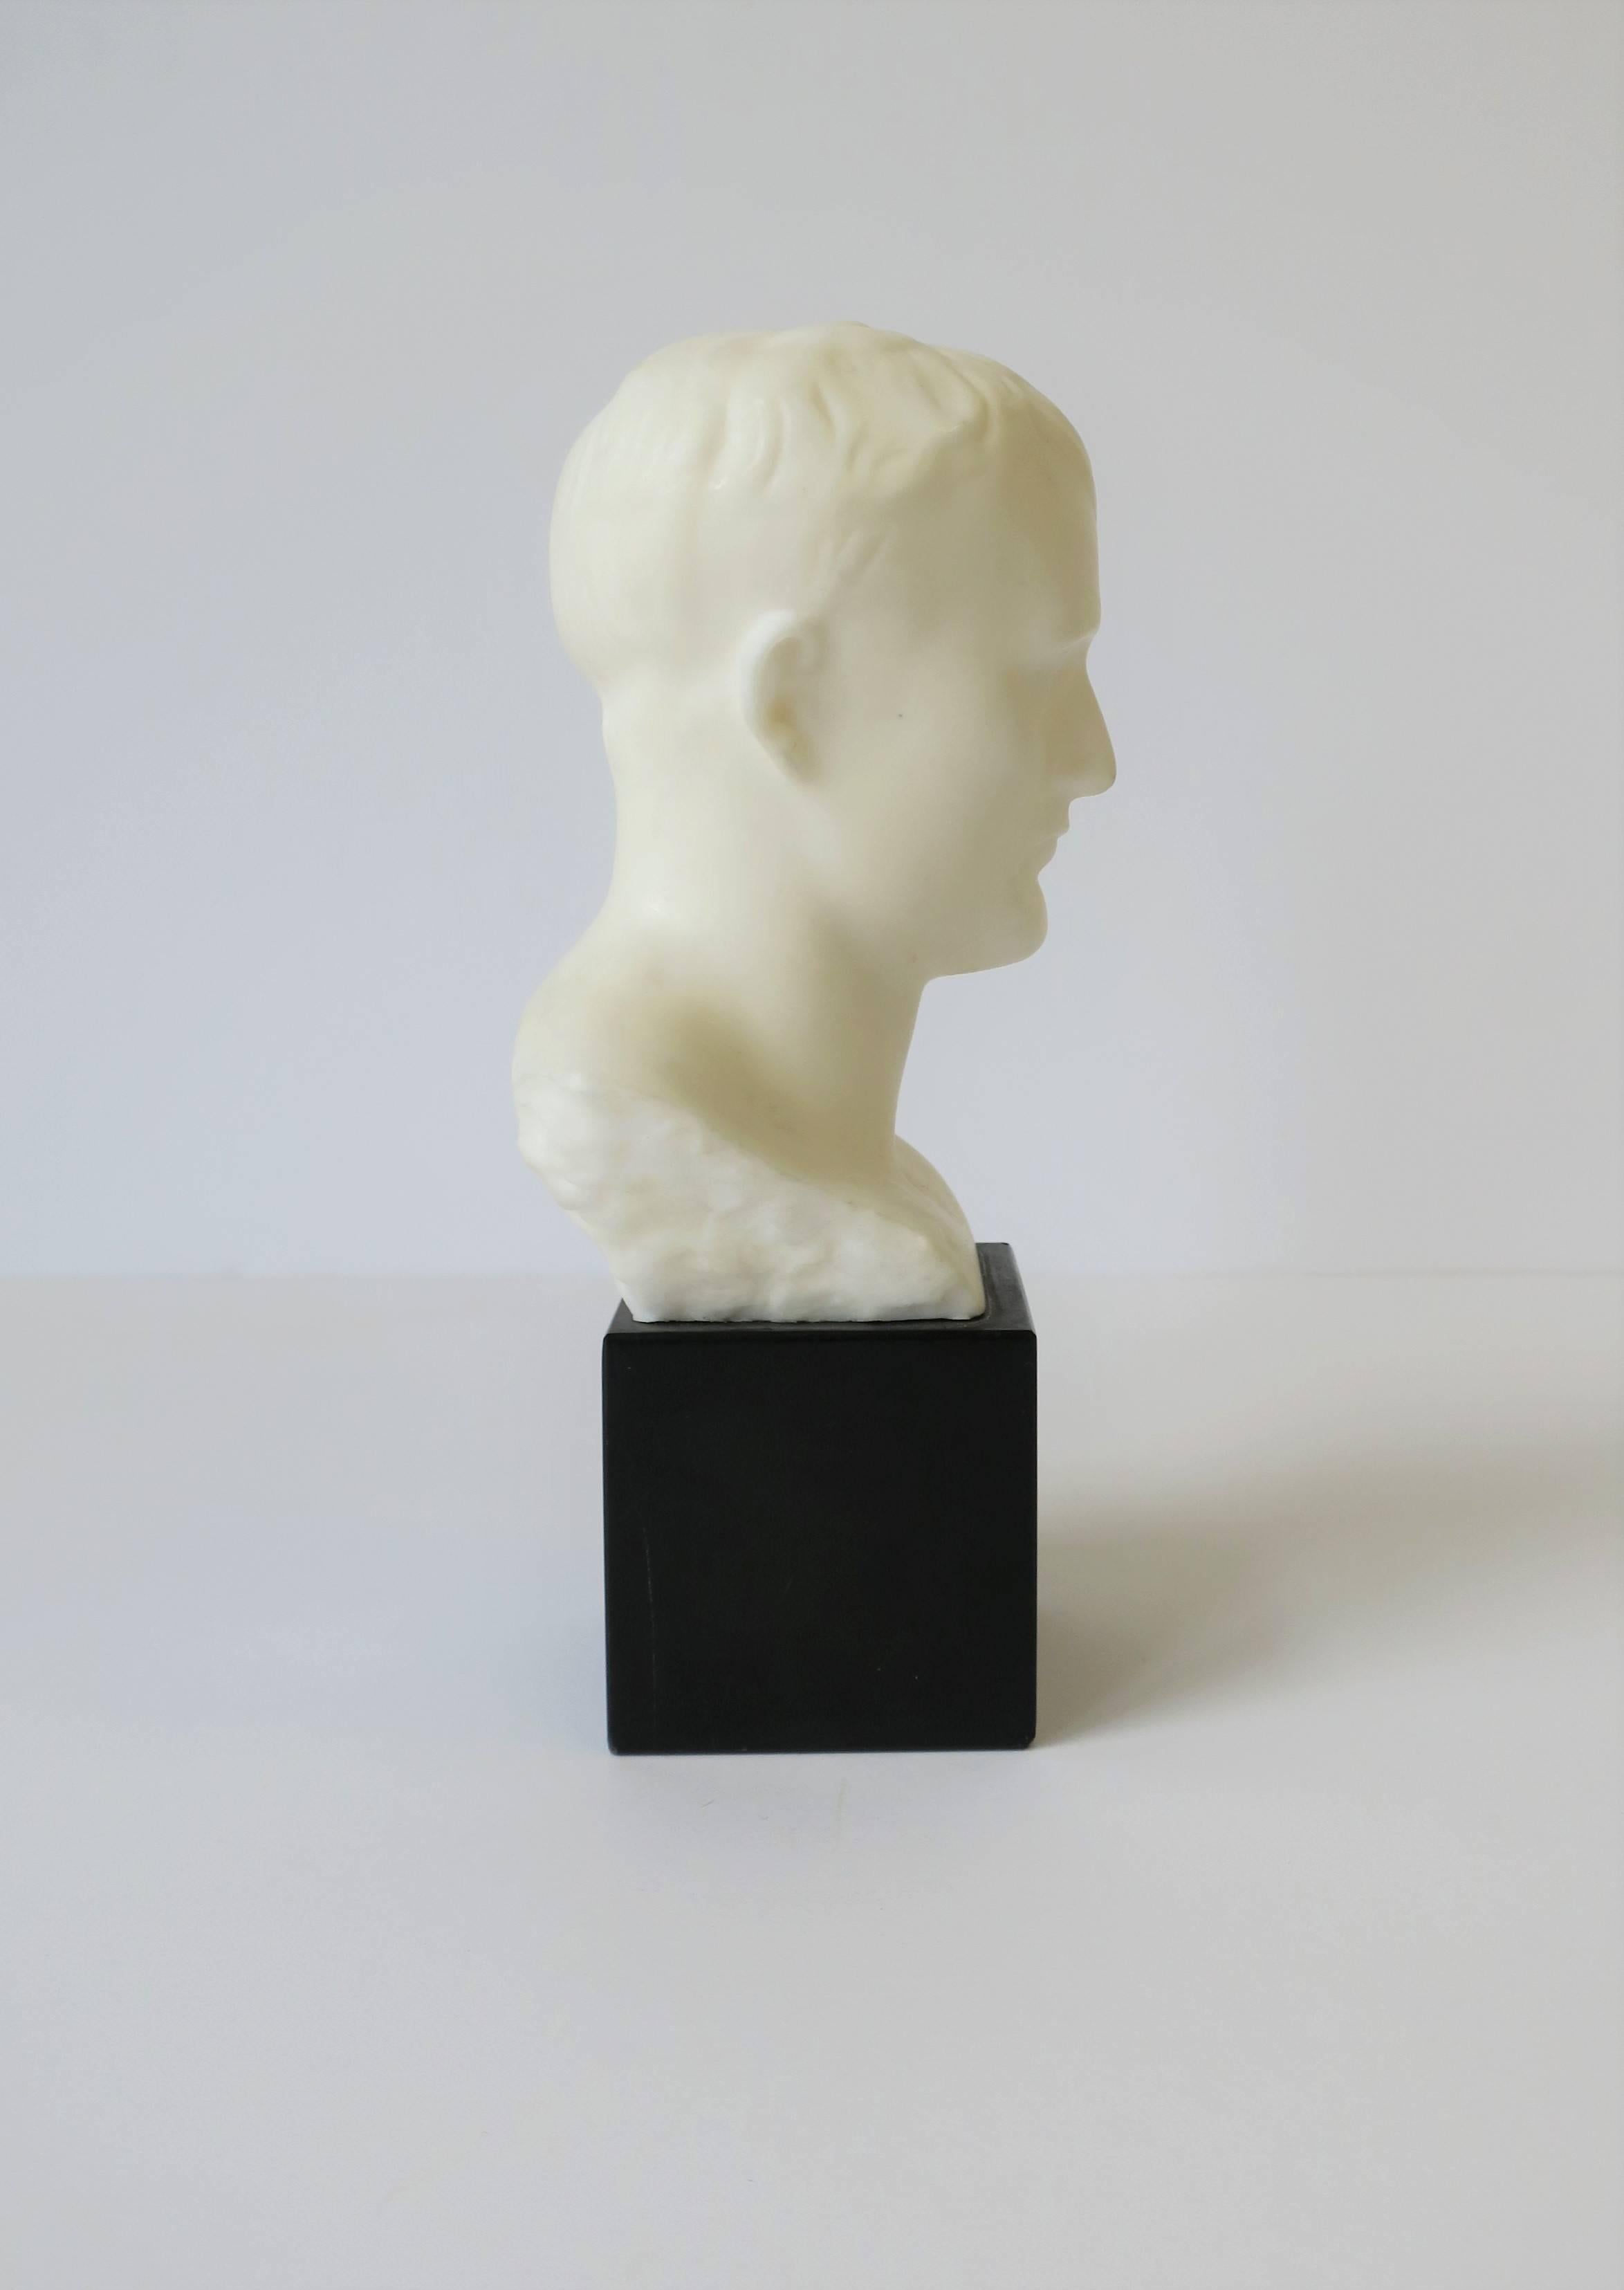 20th Century Male Bust Sculpture on Black Marble Base